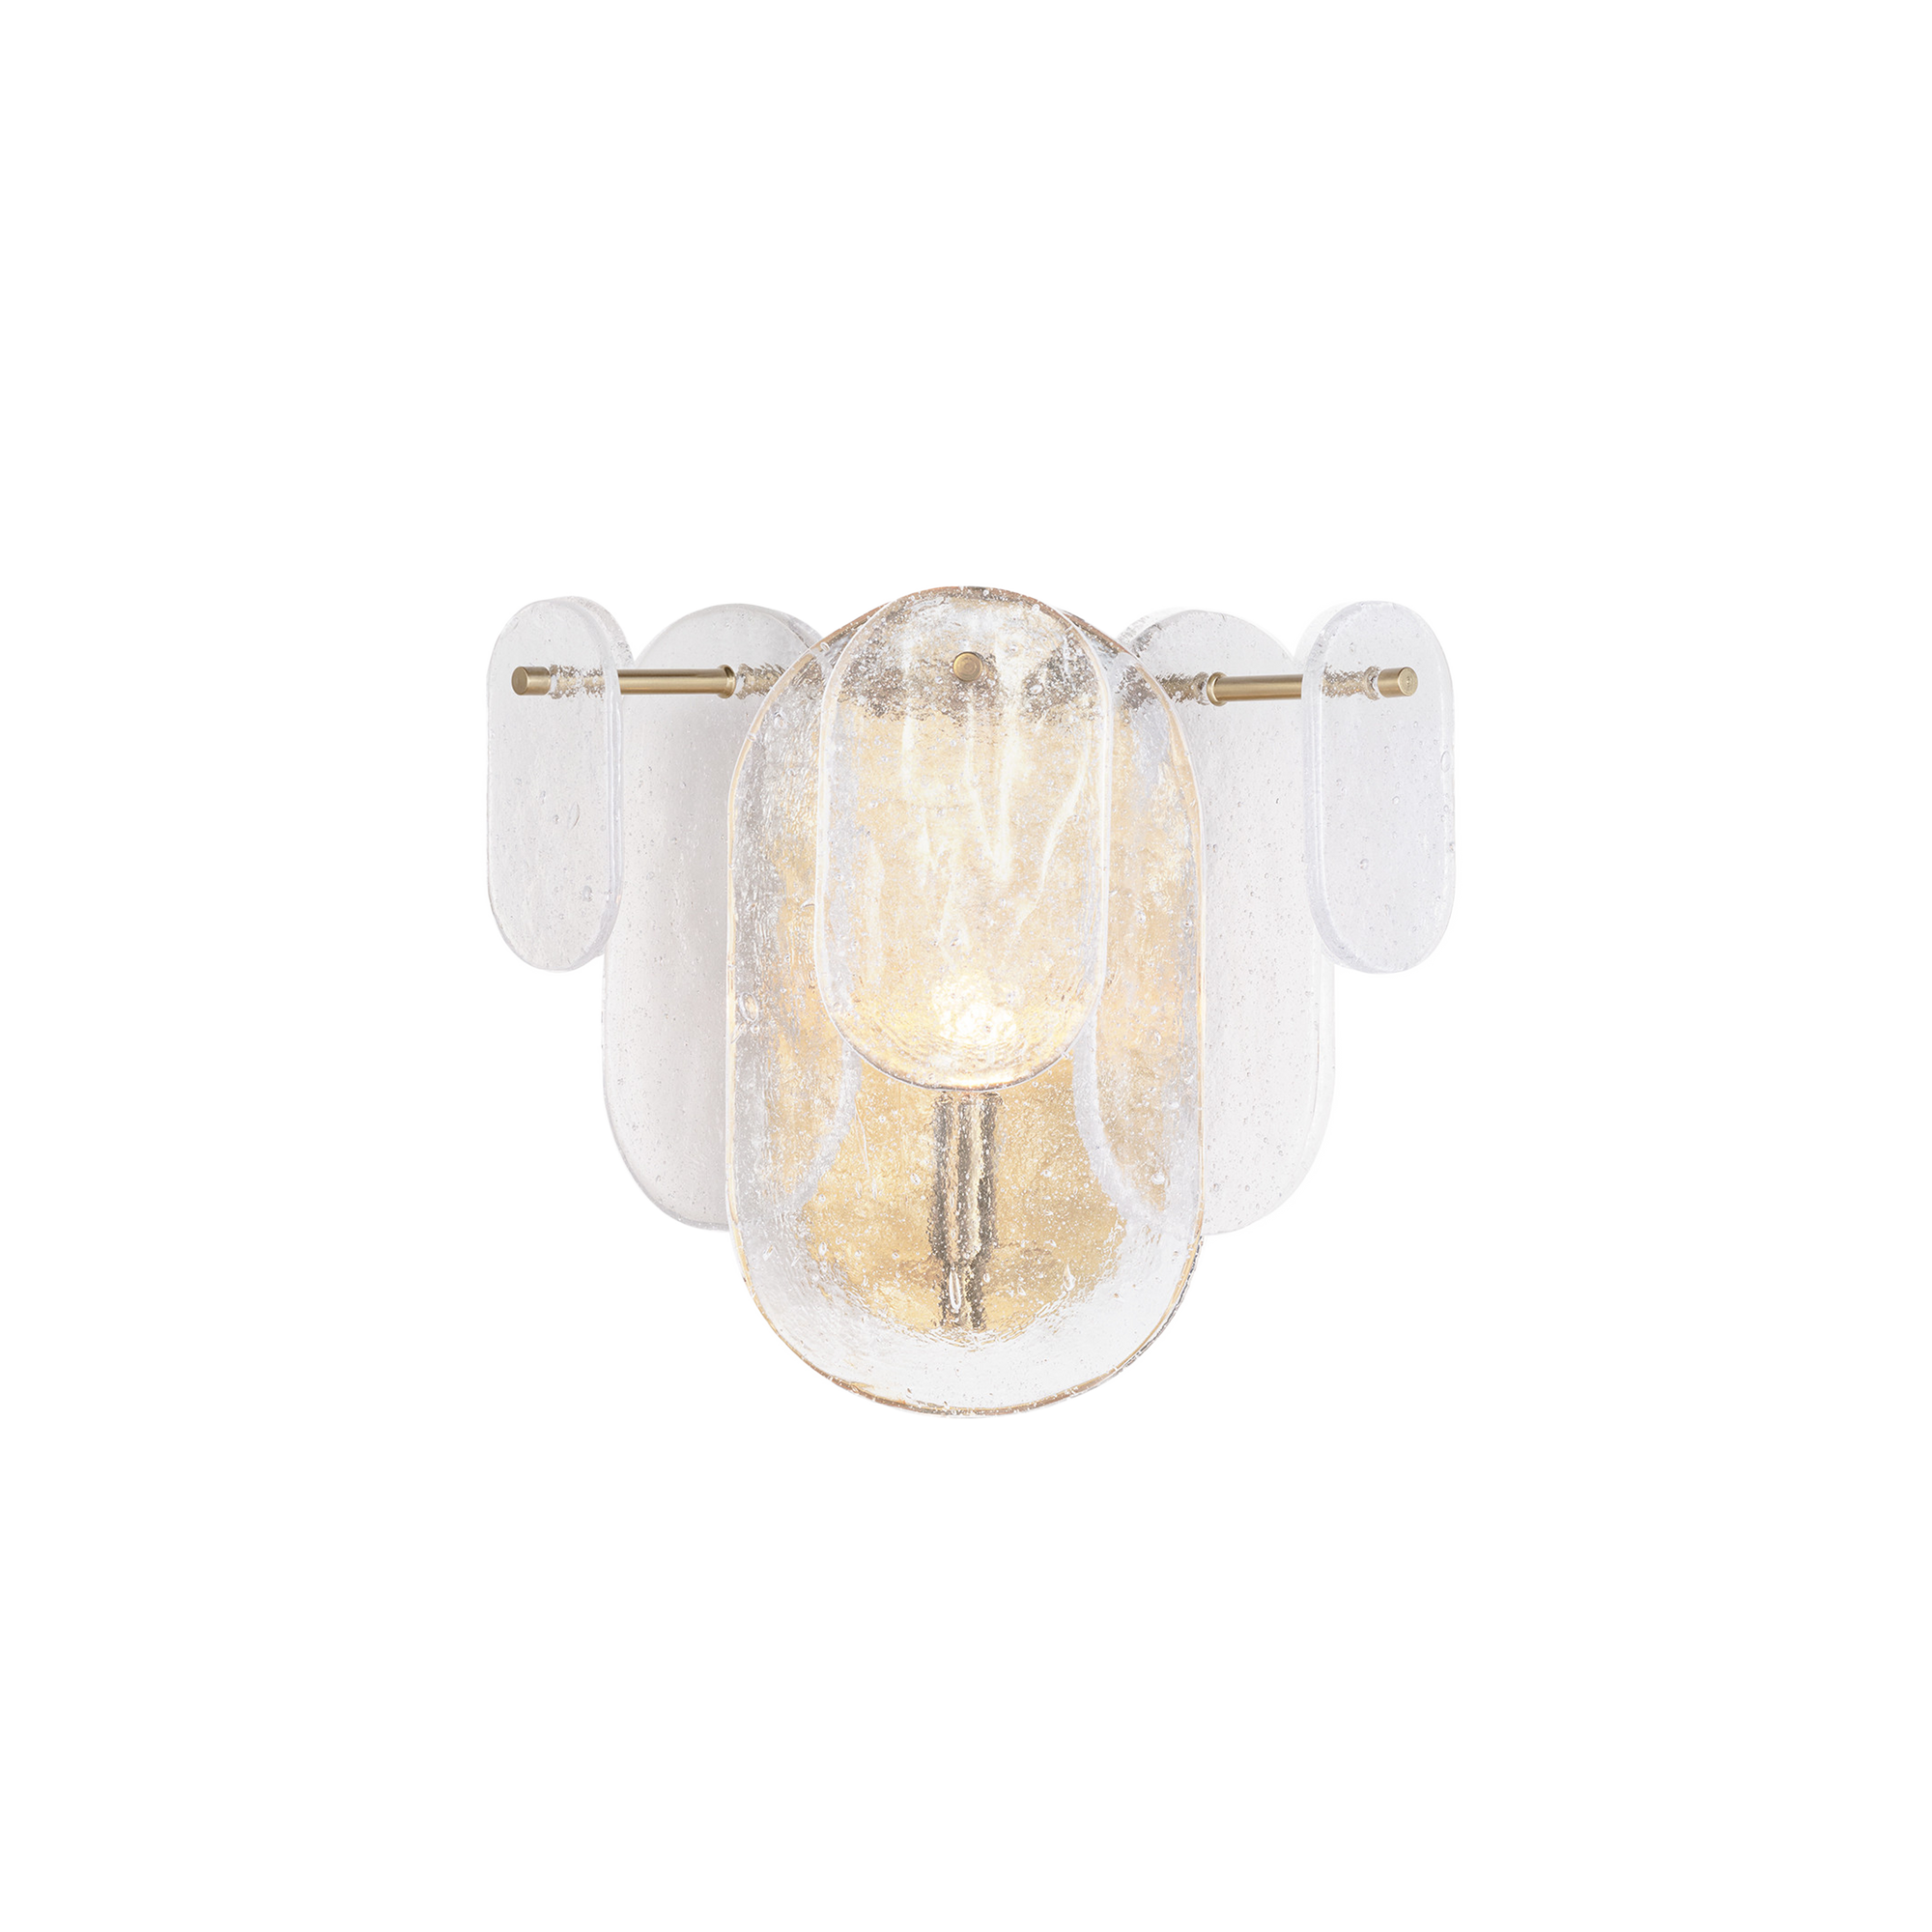 Modern and elegant, panes of striking water glass adorn the Echo Sconce to create a dynamic lighting piece.